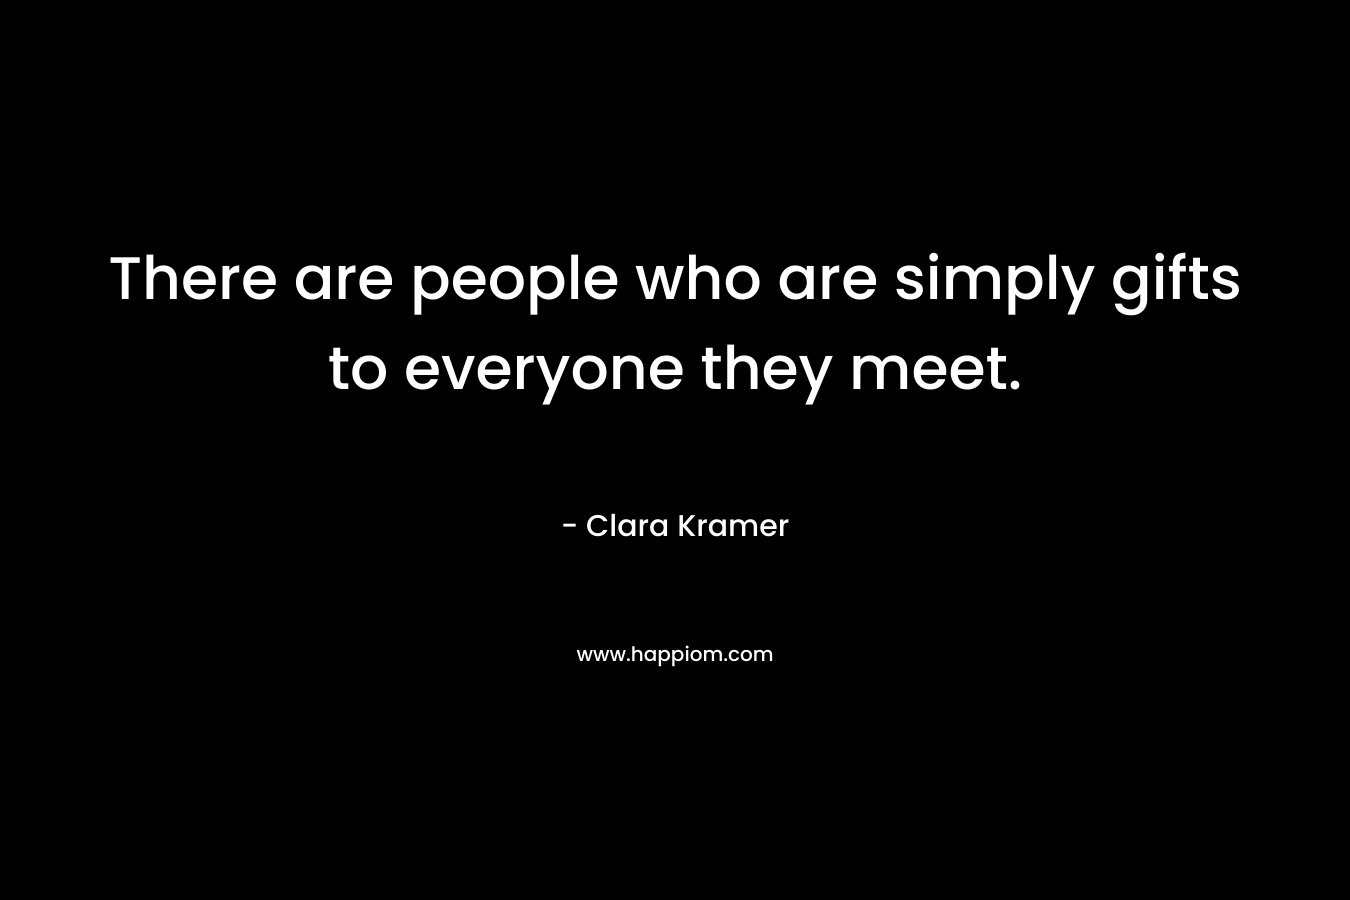 There are people who are simply gifts to everyone they meet. – Clara Kramer